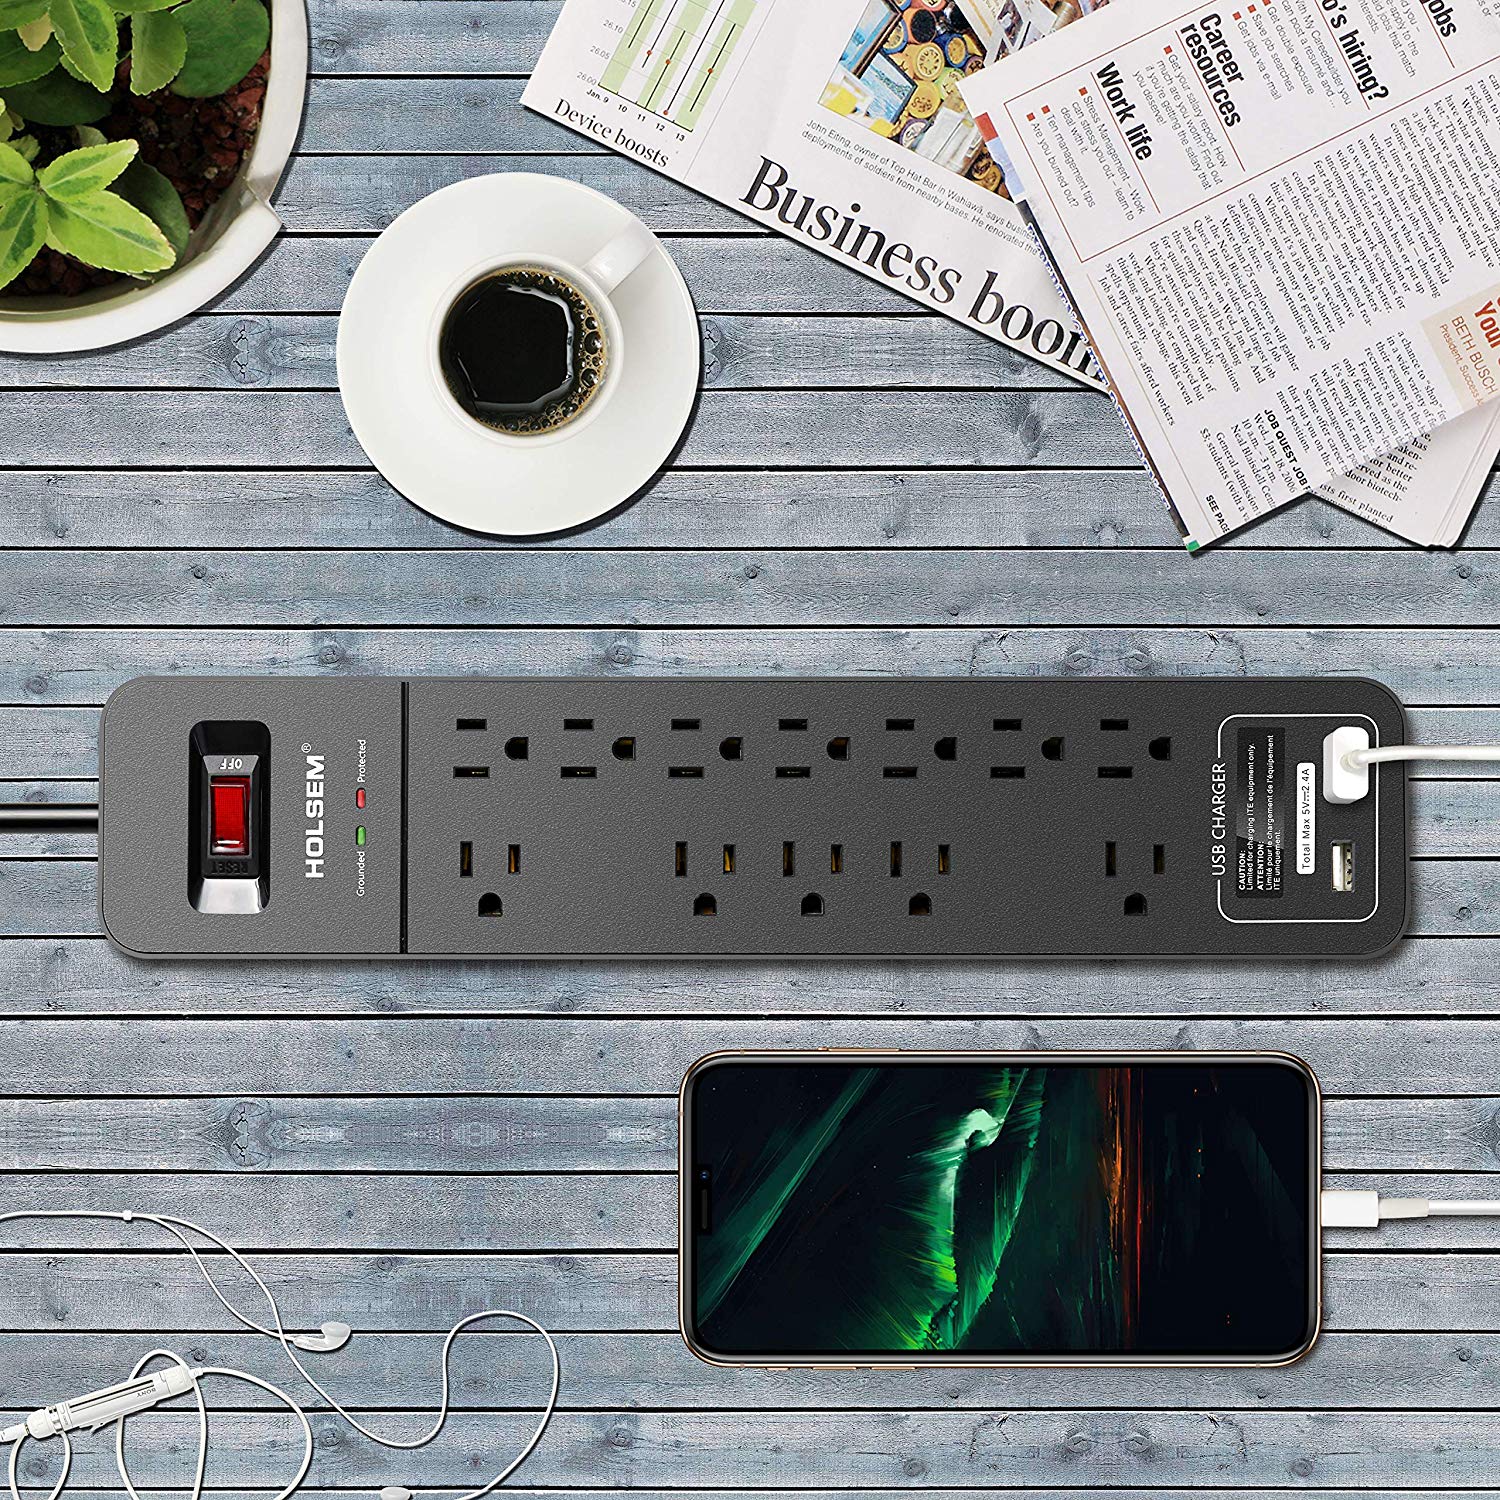 Surge Protector 12 Outlets 2 USB Ports Black